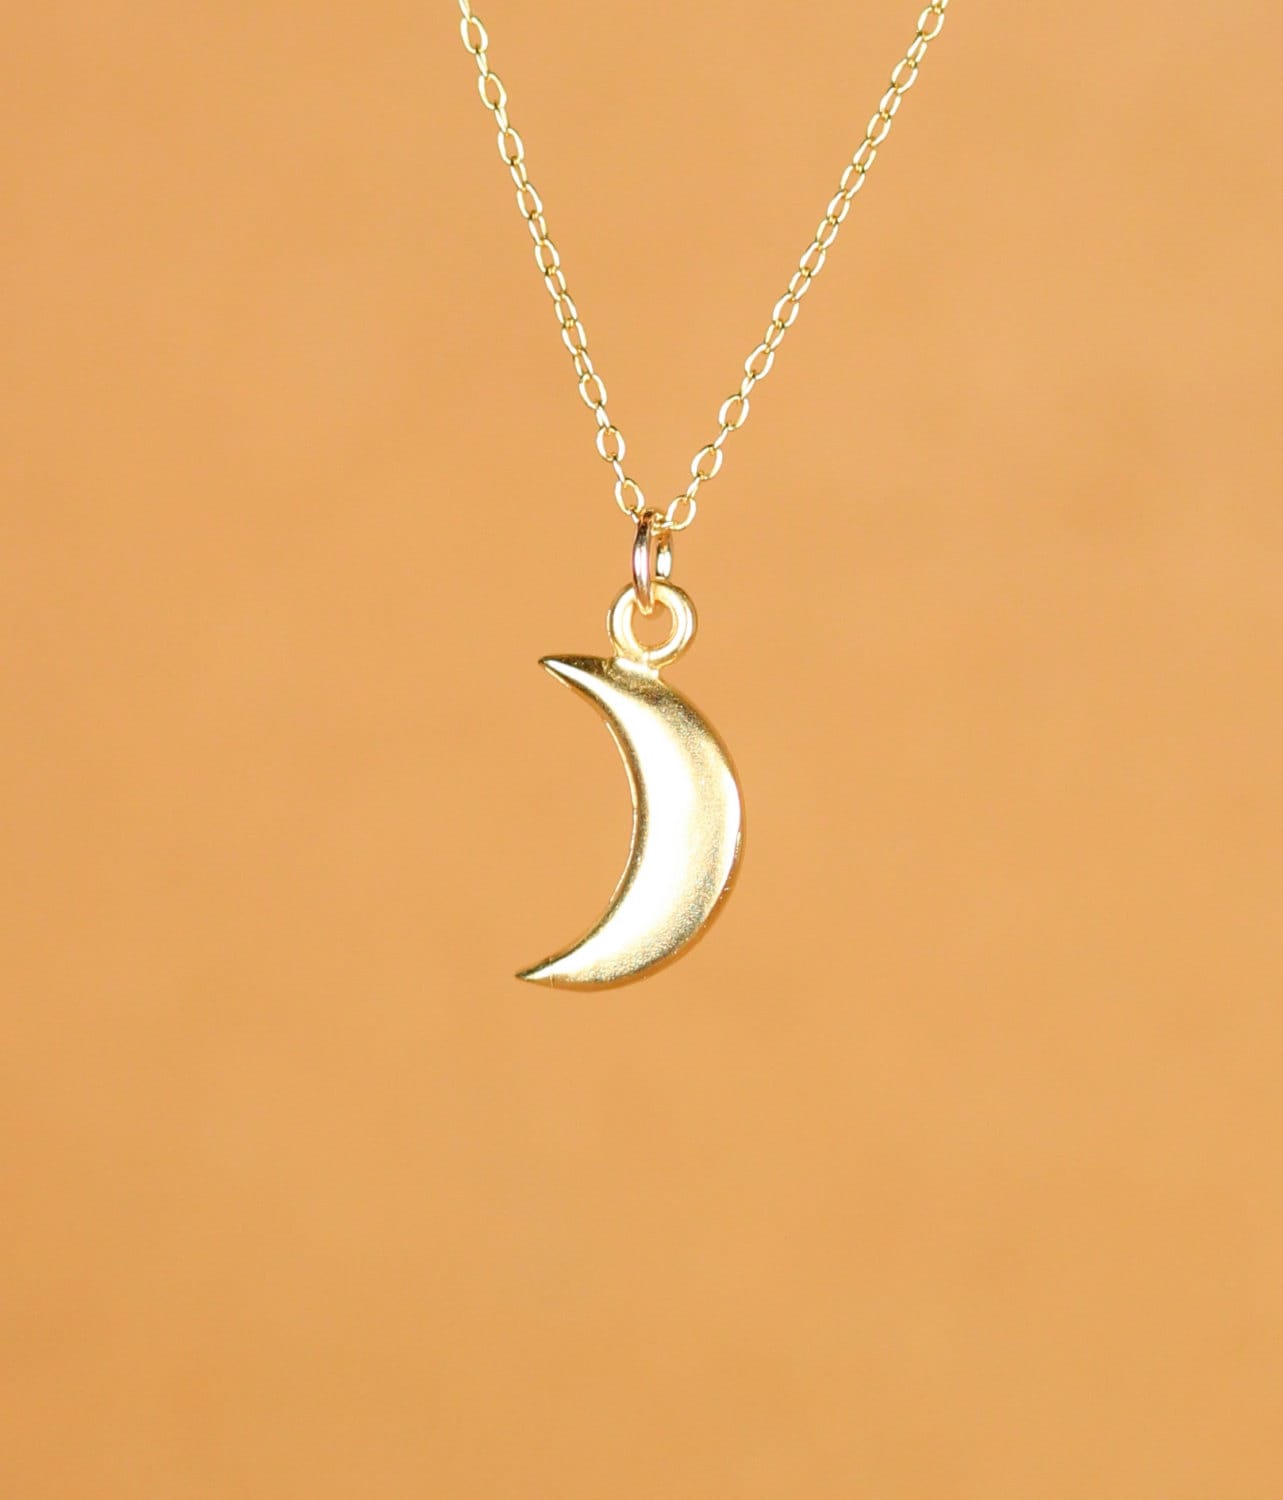 Moon necklace, gold crescent moon jewelry, dainty moon pendant, gift ...